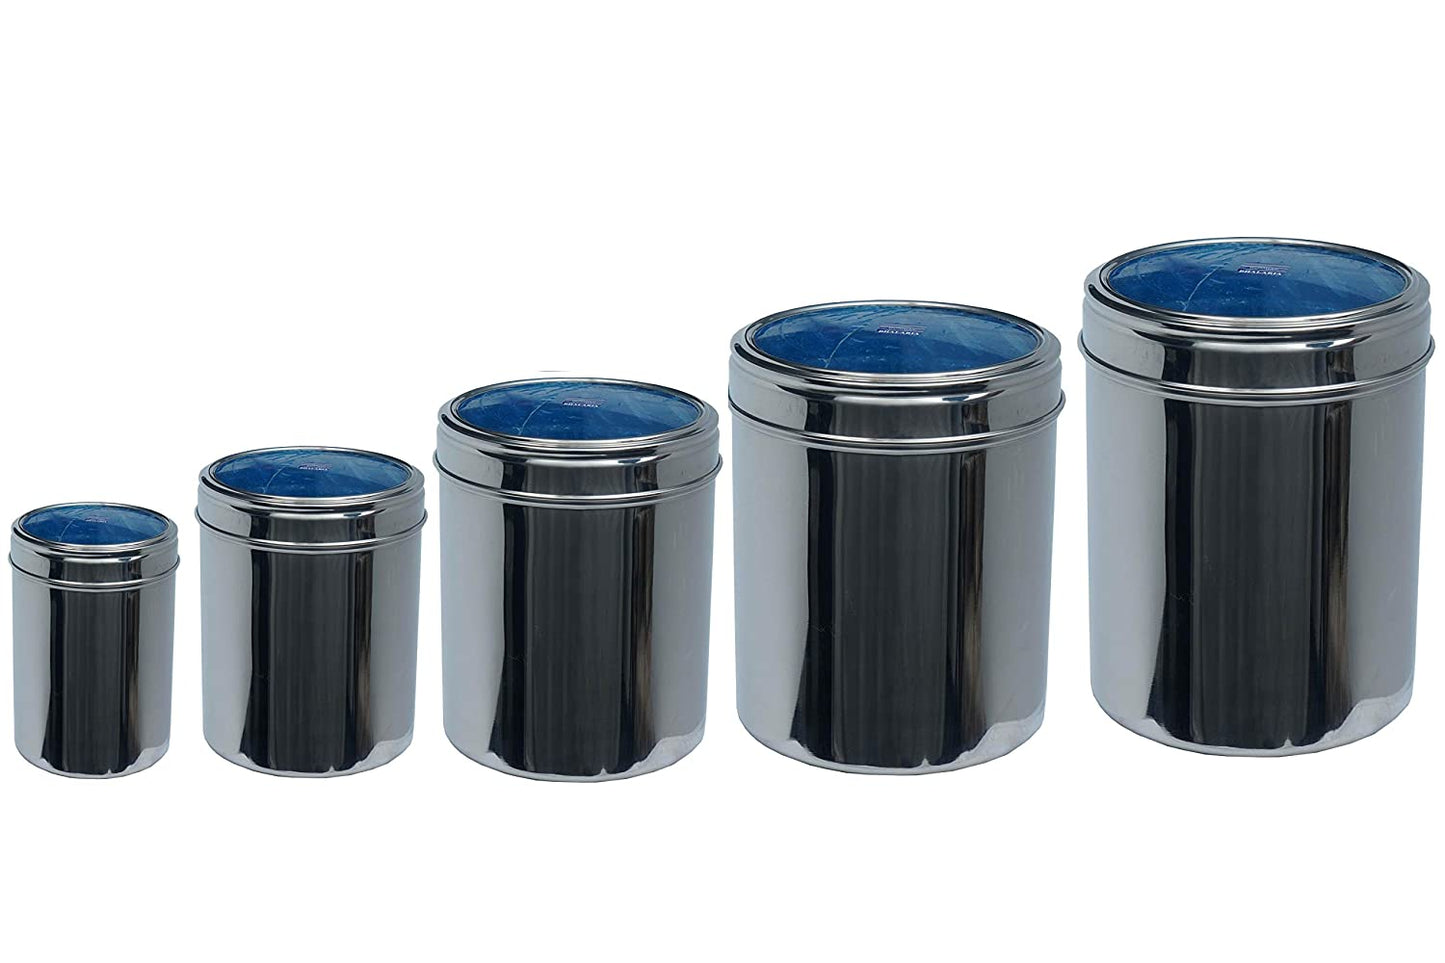 Stainless Steel Canister Set With Lid - Set Of 5 Pcs